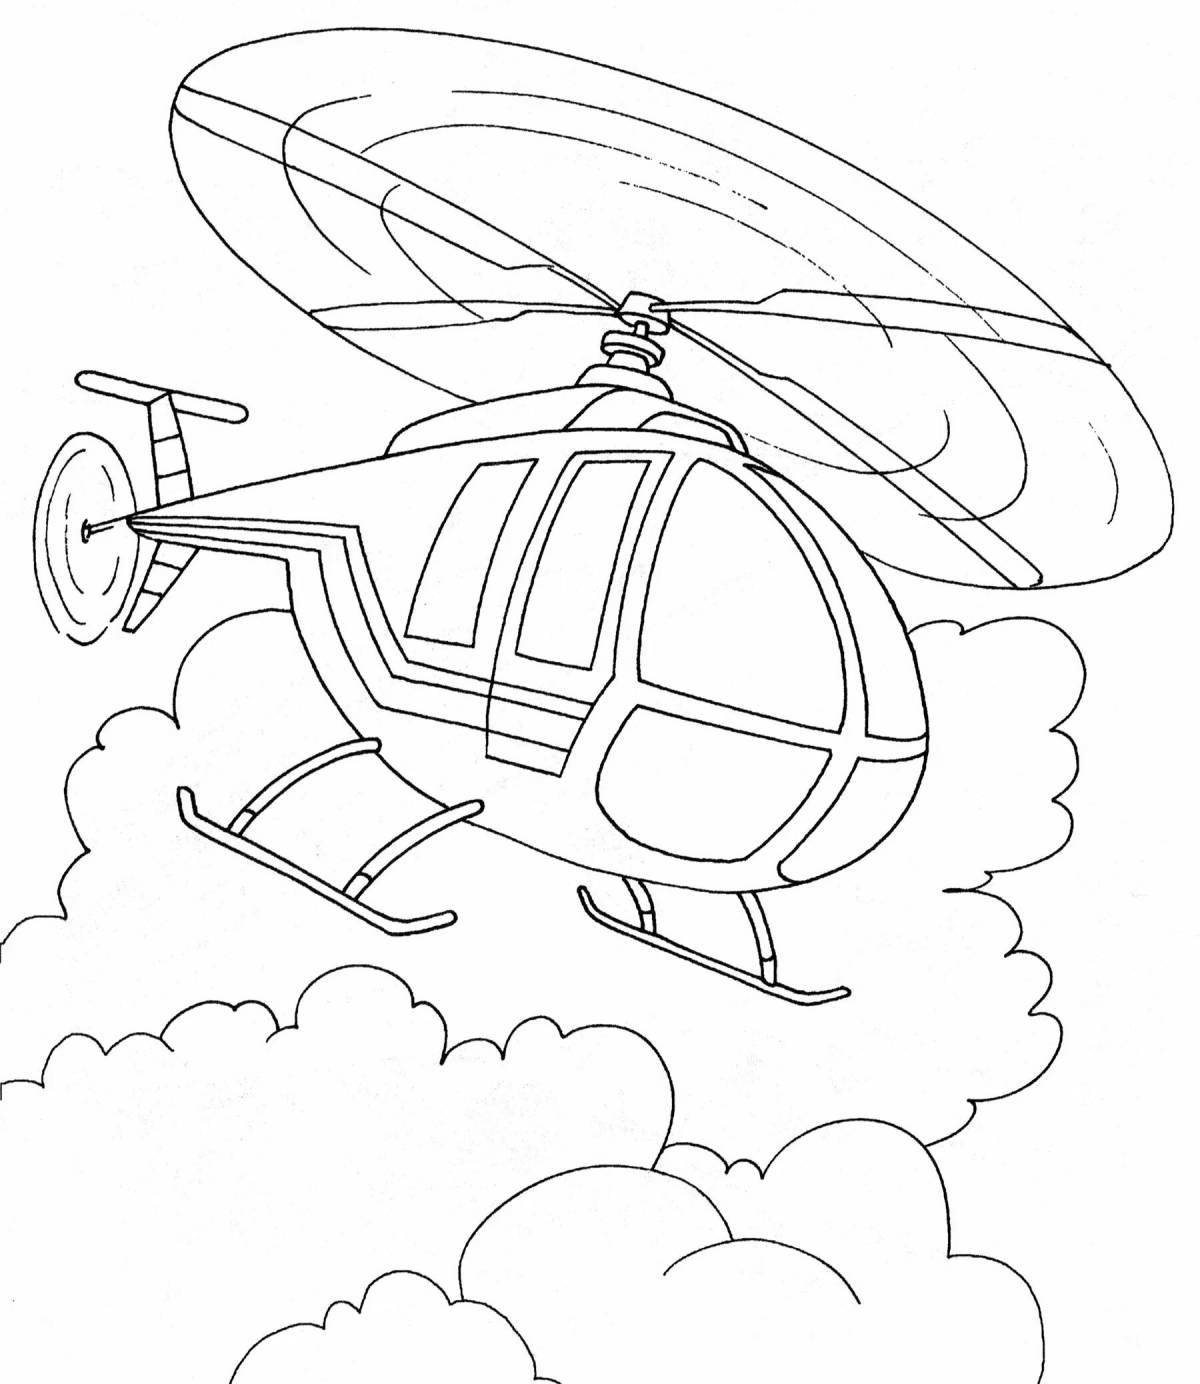 Awesome fire helicopter coloring page